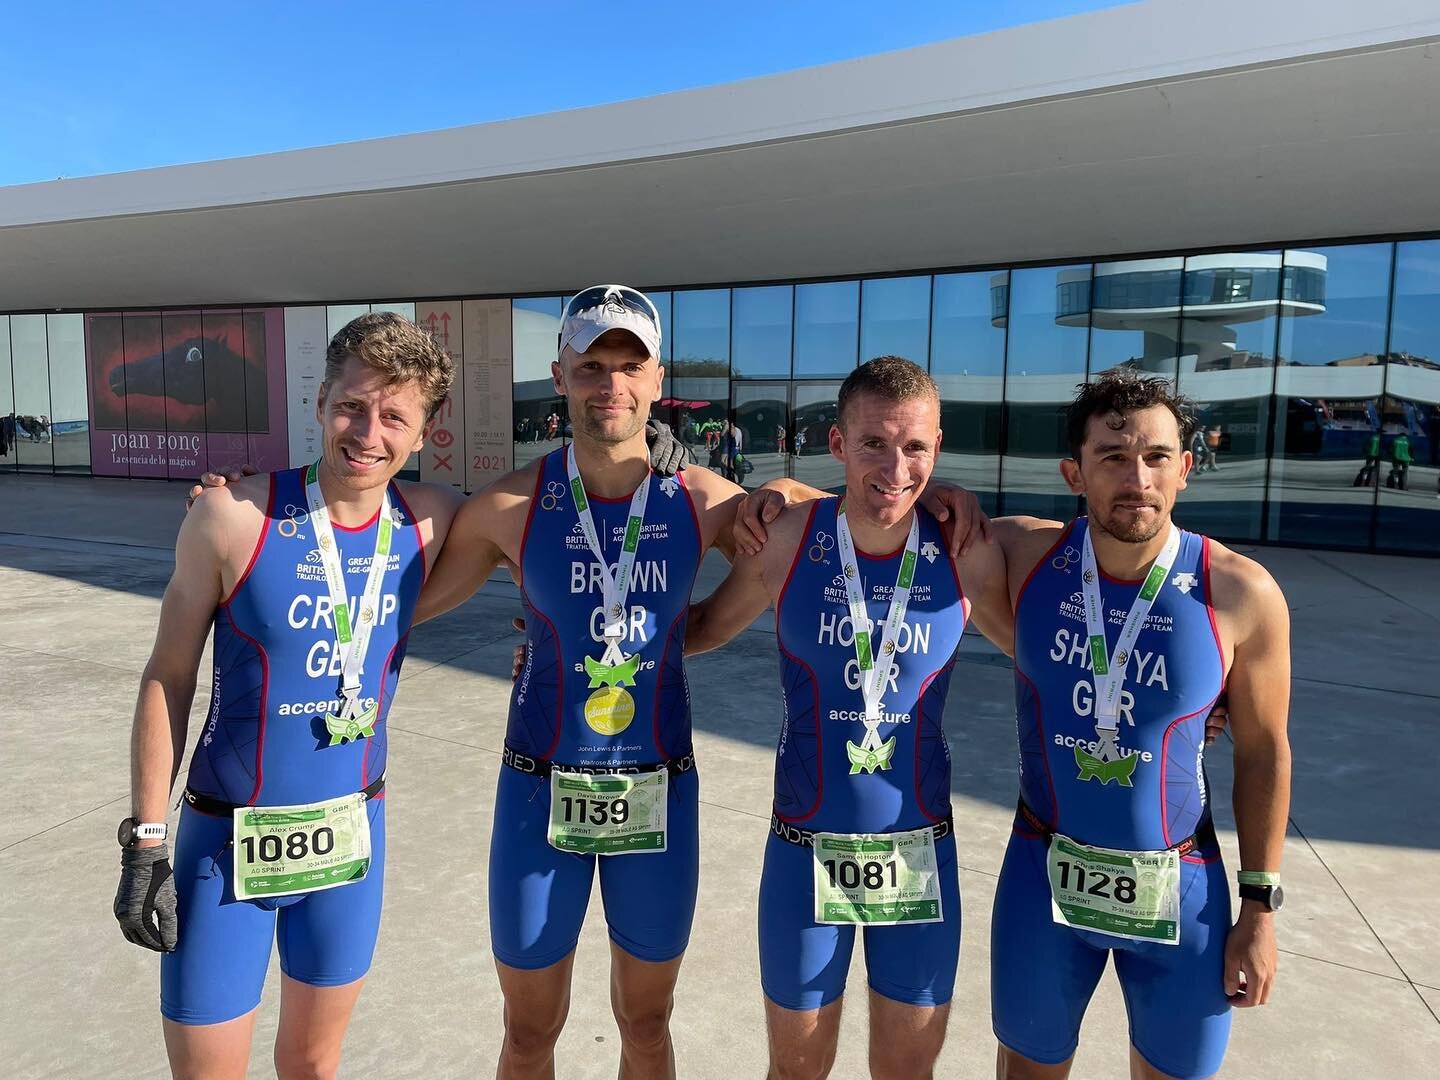 The boys dun well. 4th for @samhopton89 (that 🏅 still being dangled in front of him) 14th for @alexcrump90, 19th for @duathlon_dave on their #worldduathlonchampionships debuts and a shout out to @shaks84 for a nice 18th place in the 35-39age-group. 